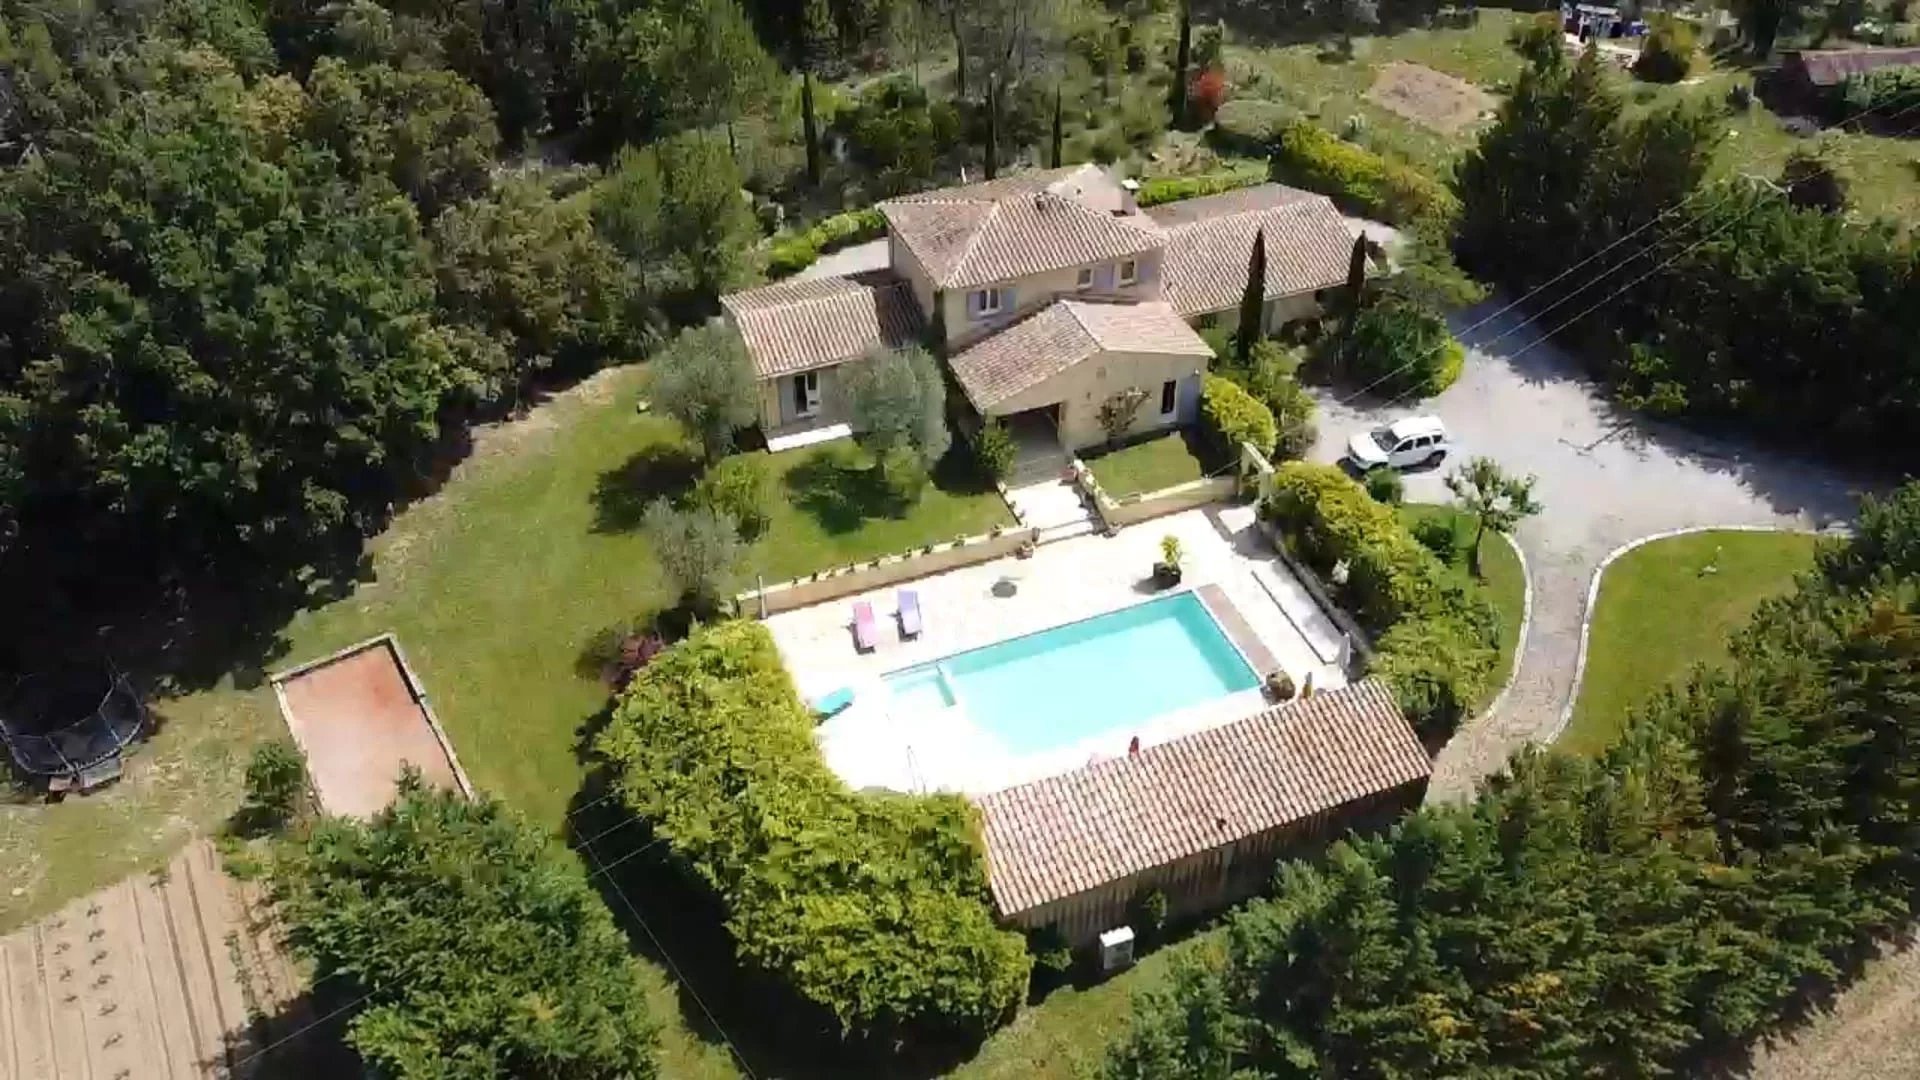 BRIGNOLES-Provençal Bastide style house with 6 bedrooms on 10,000m2